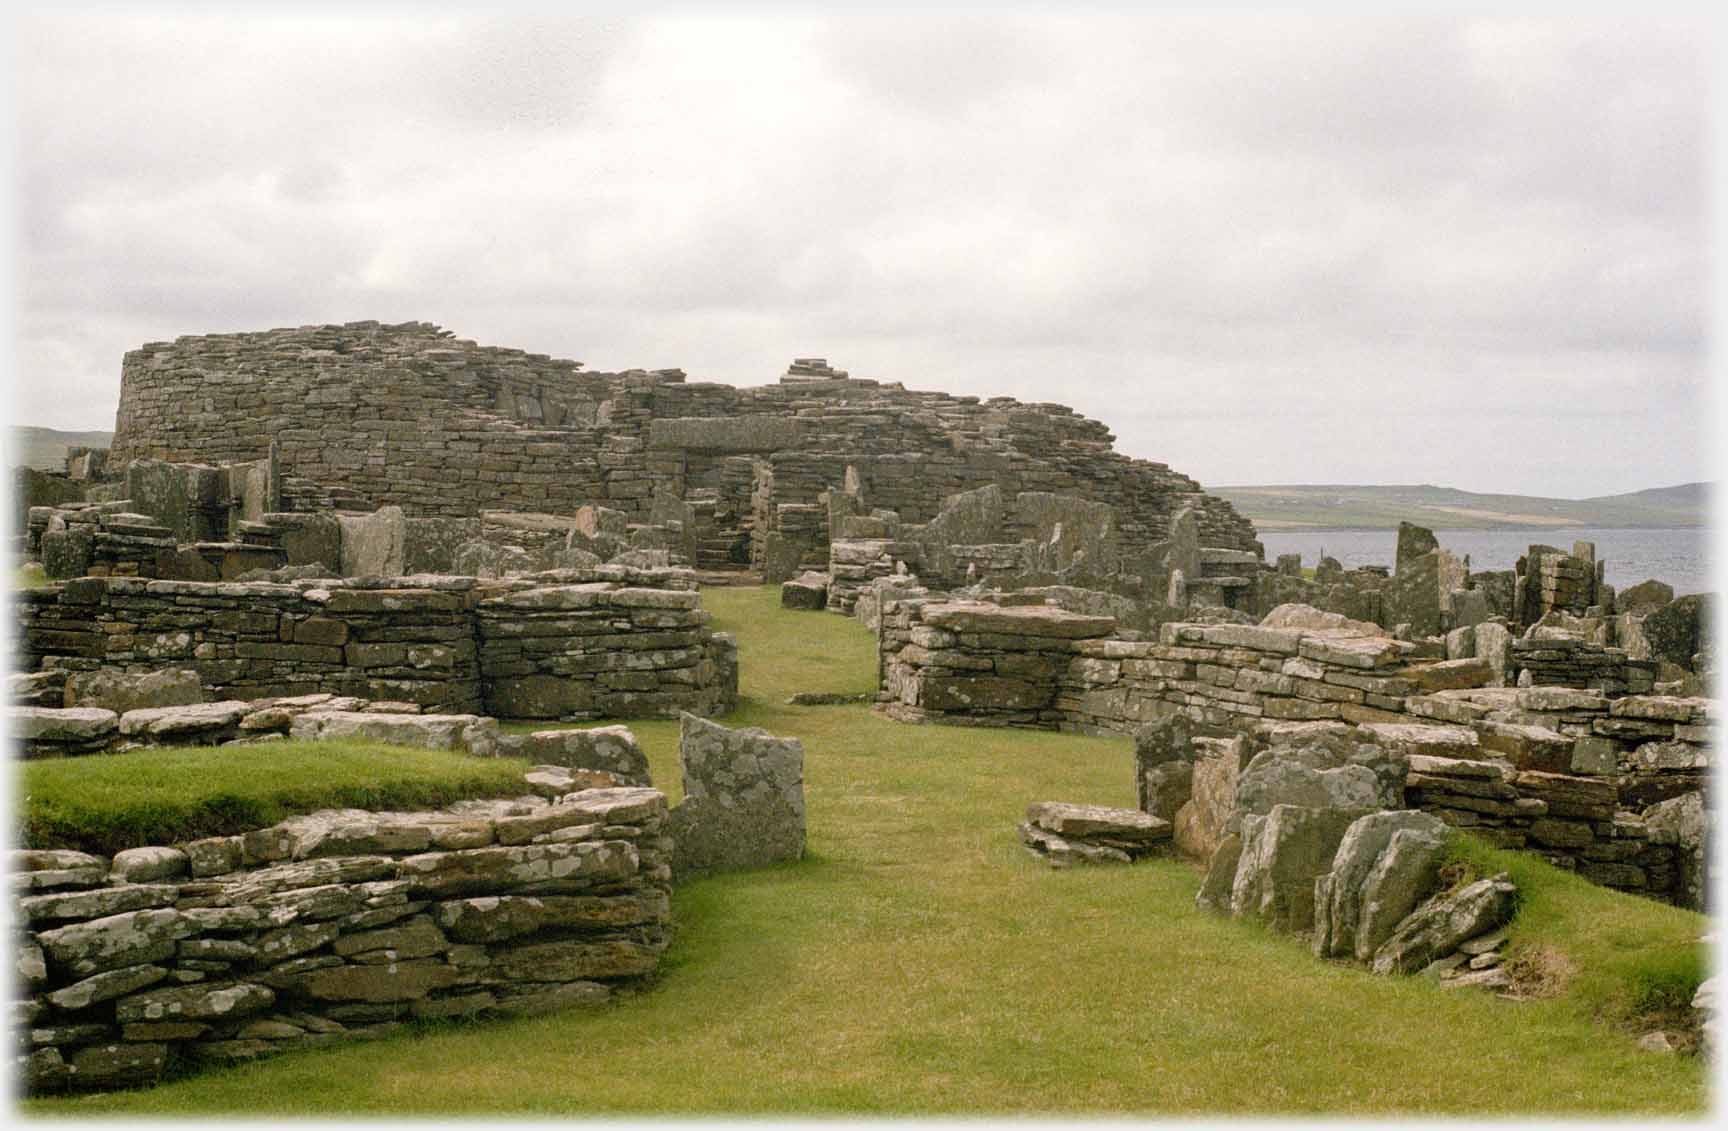 Looking along central path with ruined houses on both sides and ruin of broch ahead.